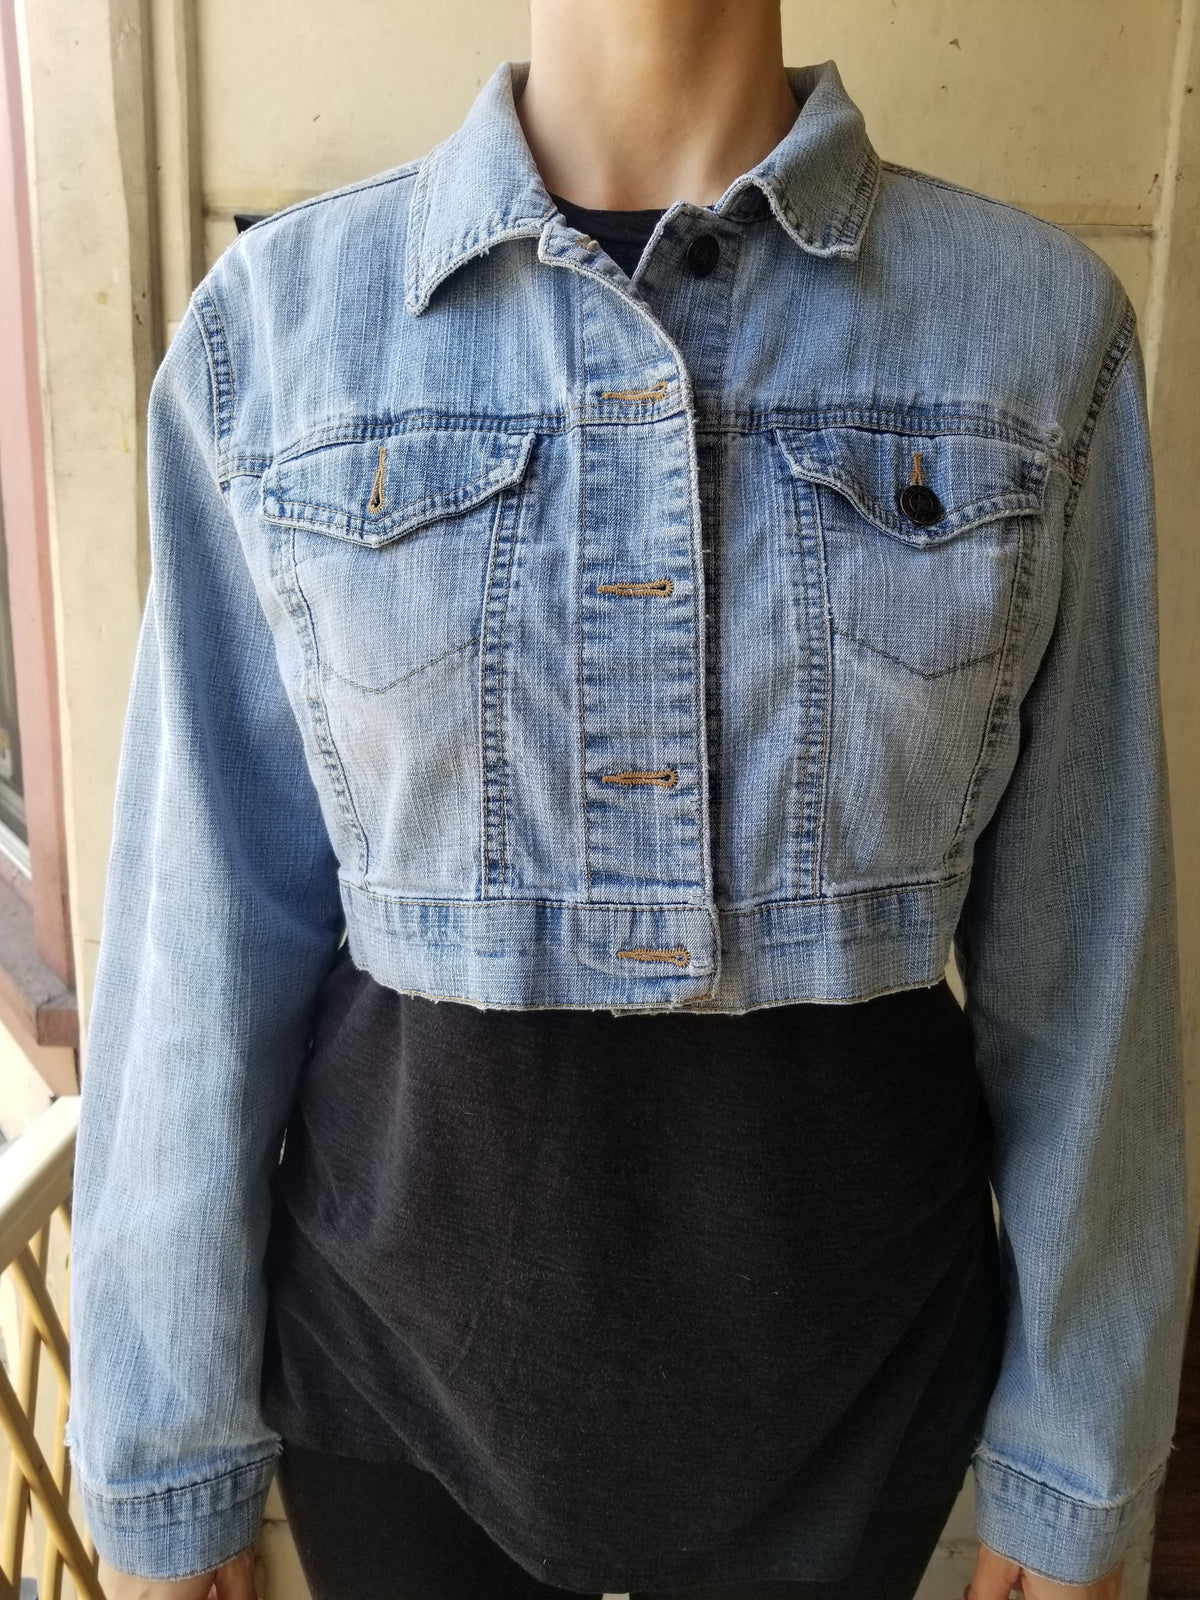 SOLD - One of a Kind Upcycled Jean Jacket Vegan Rebel by Le Fou